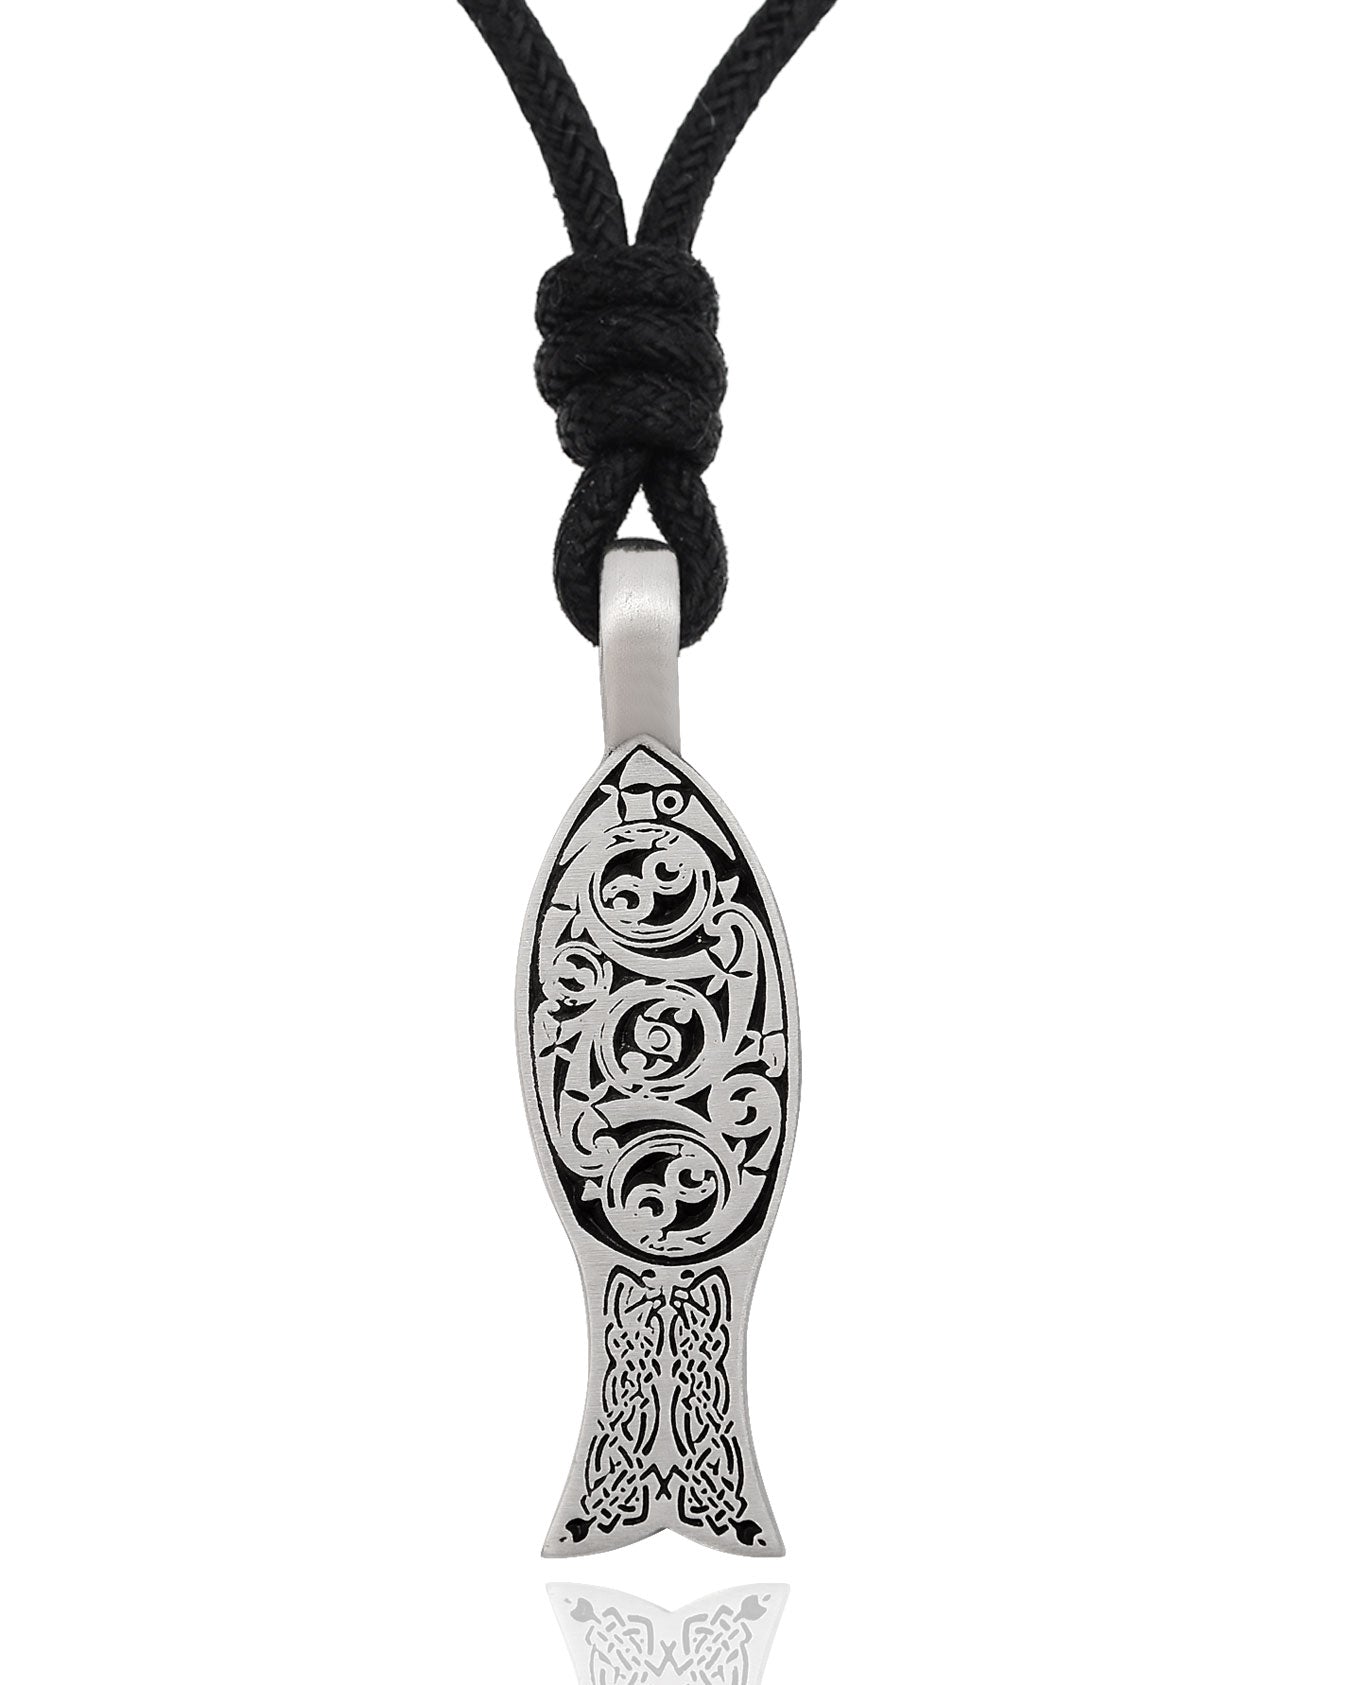 Stylish Celtic Fish Silver Pewter Charm Necklace Pendant Jewelry